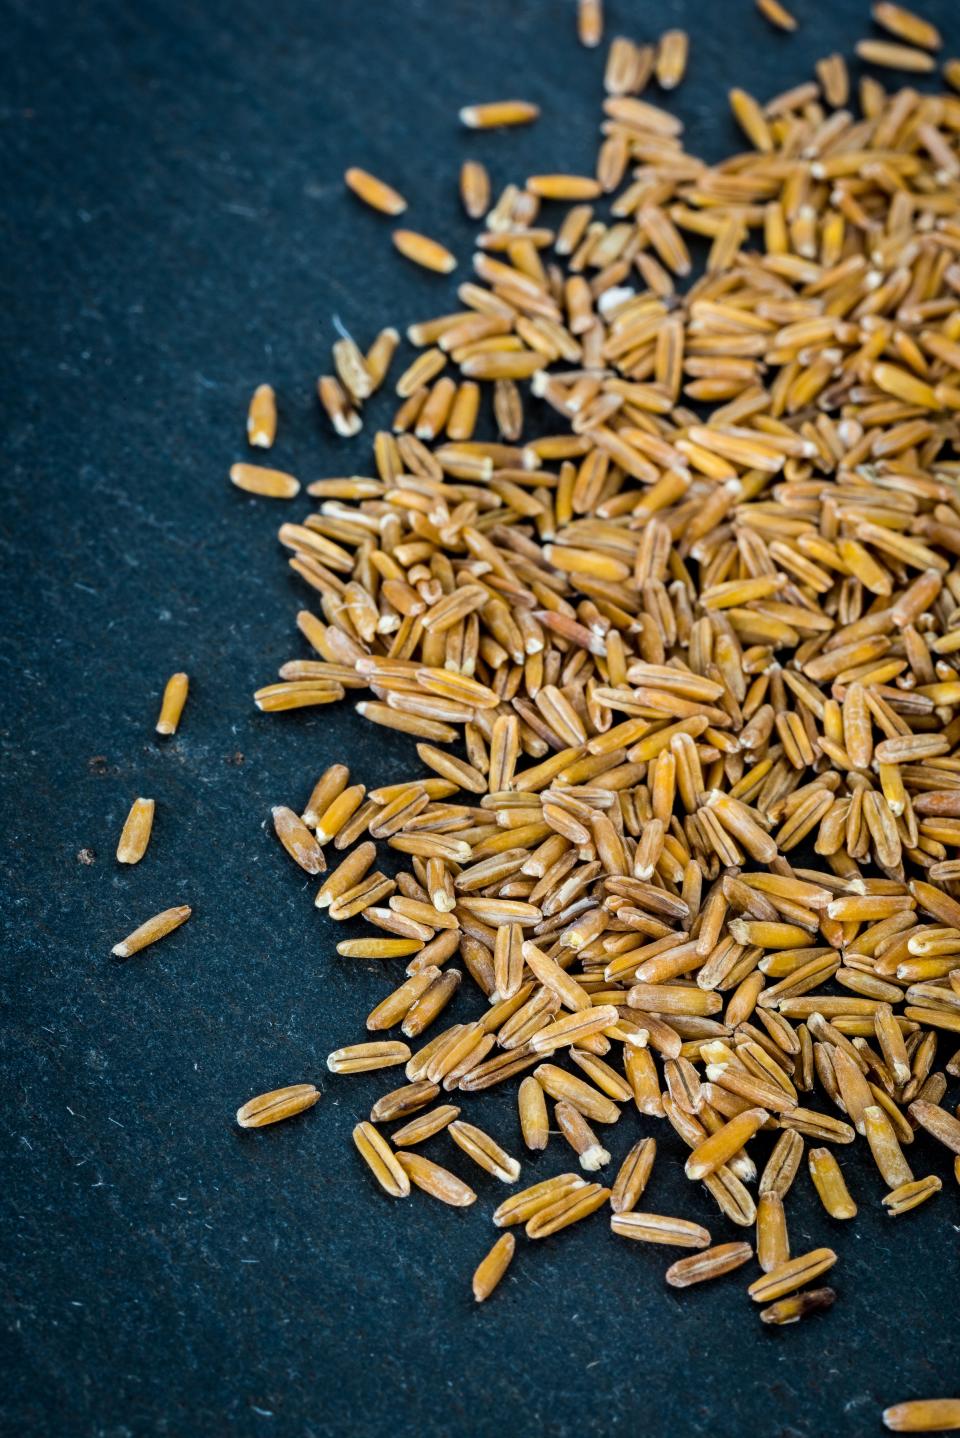 The grain Kernza is billed as better  for the environment because it's a perennial grain, which requires less tilling.